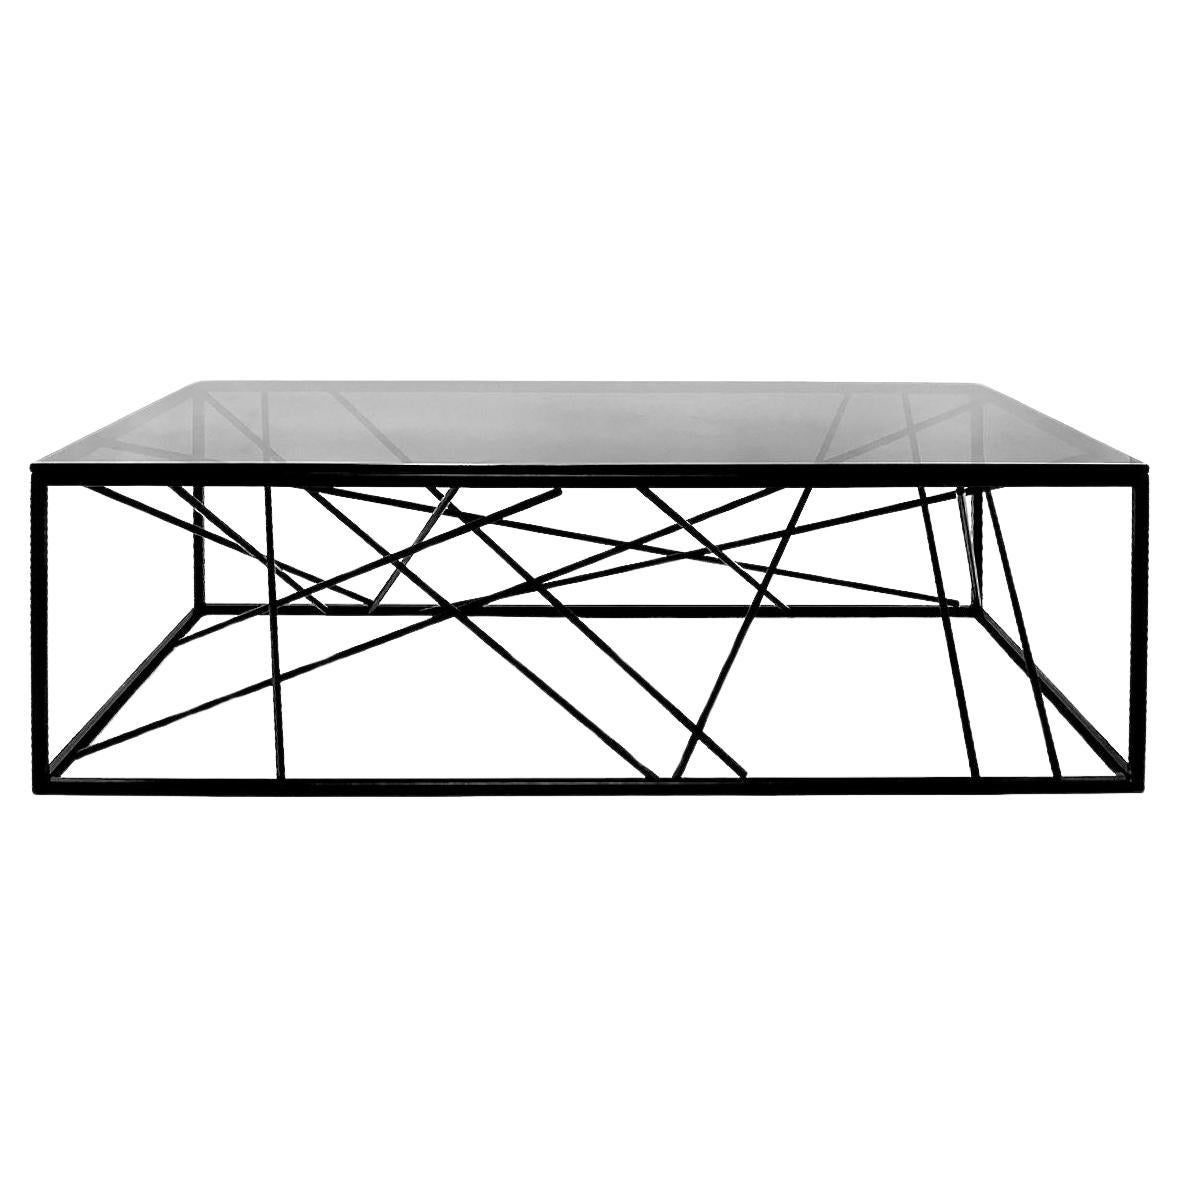 Nest Coffee Table by Morgan Clayhall, sculptural, steel, glass